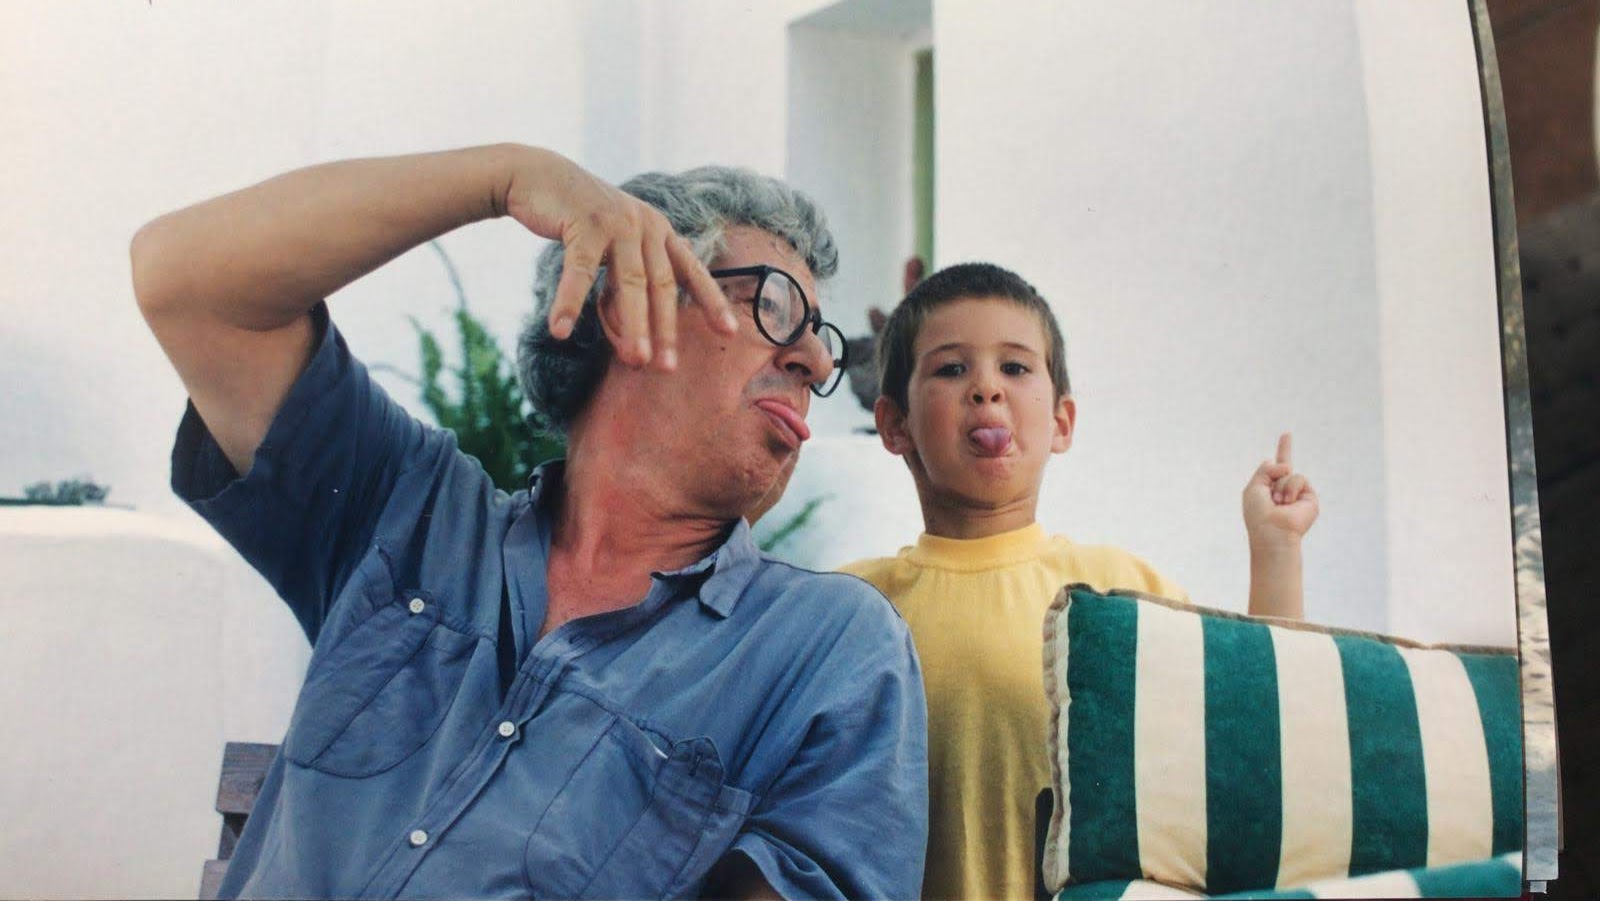 Young Ivo and granpa